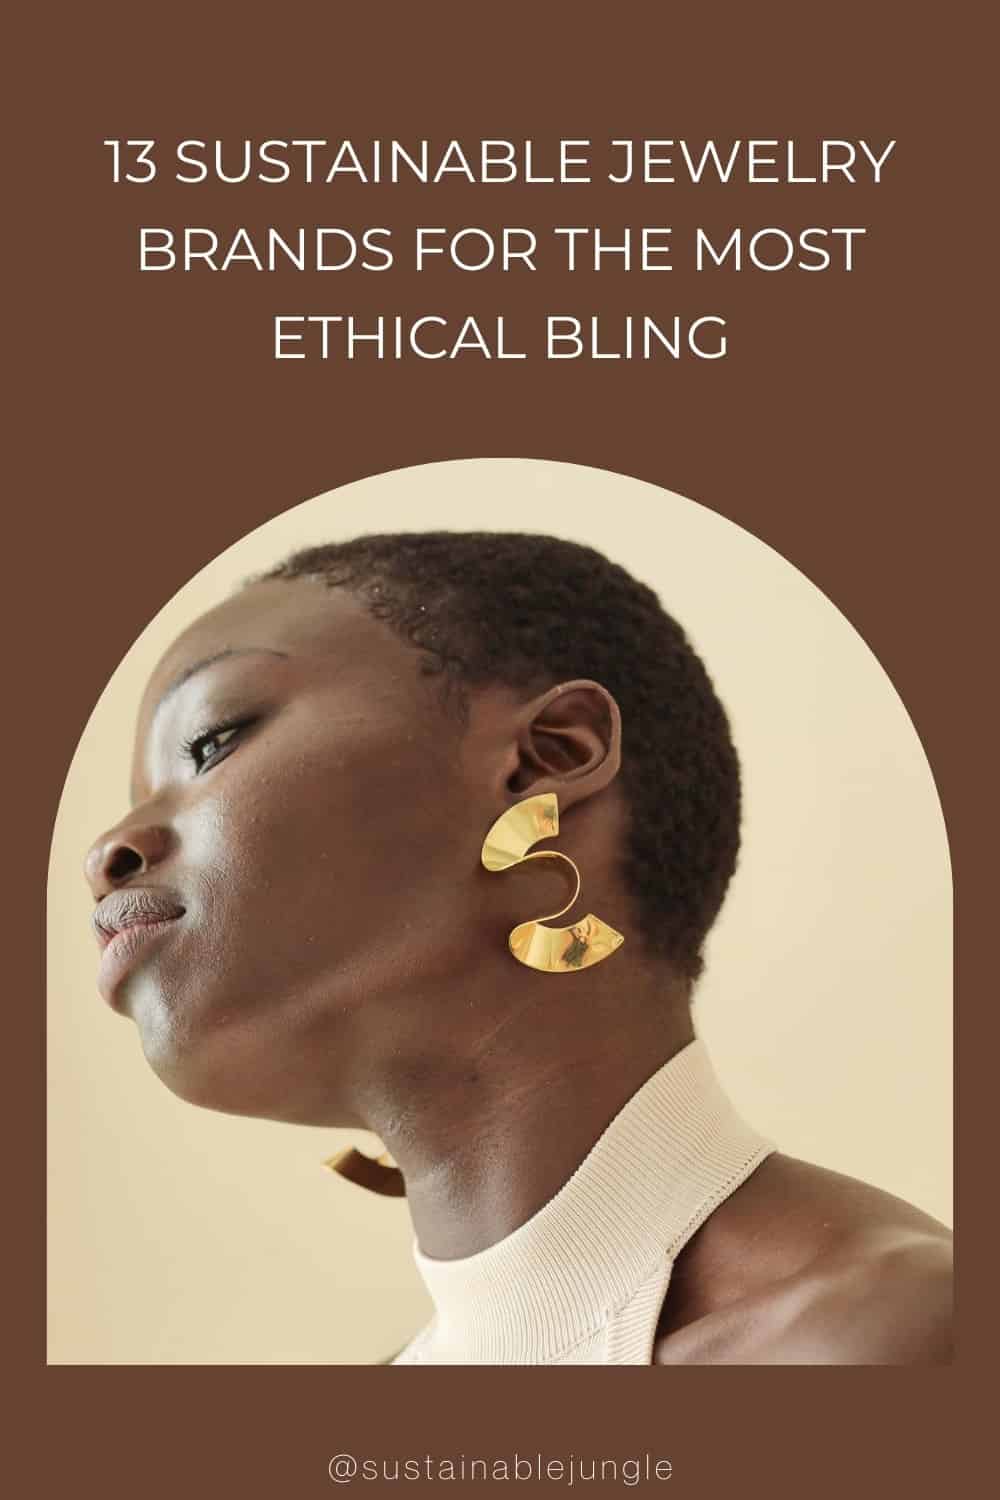 13 Sustainable Jewelry Brands For The Most Ethical Bling #sustainablejewelrybrands #ethicaljewelrybrands #ethicalfinejewelrybrands #ecofriendlyjewelry #ecofriendlysustainablejewelrybrands #sustainablejungle Image by SOKO